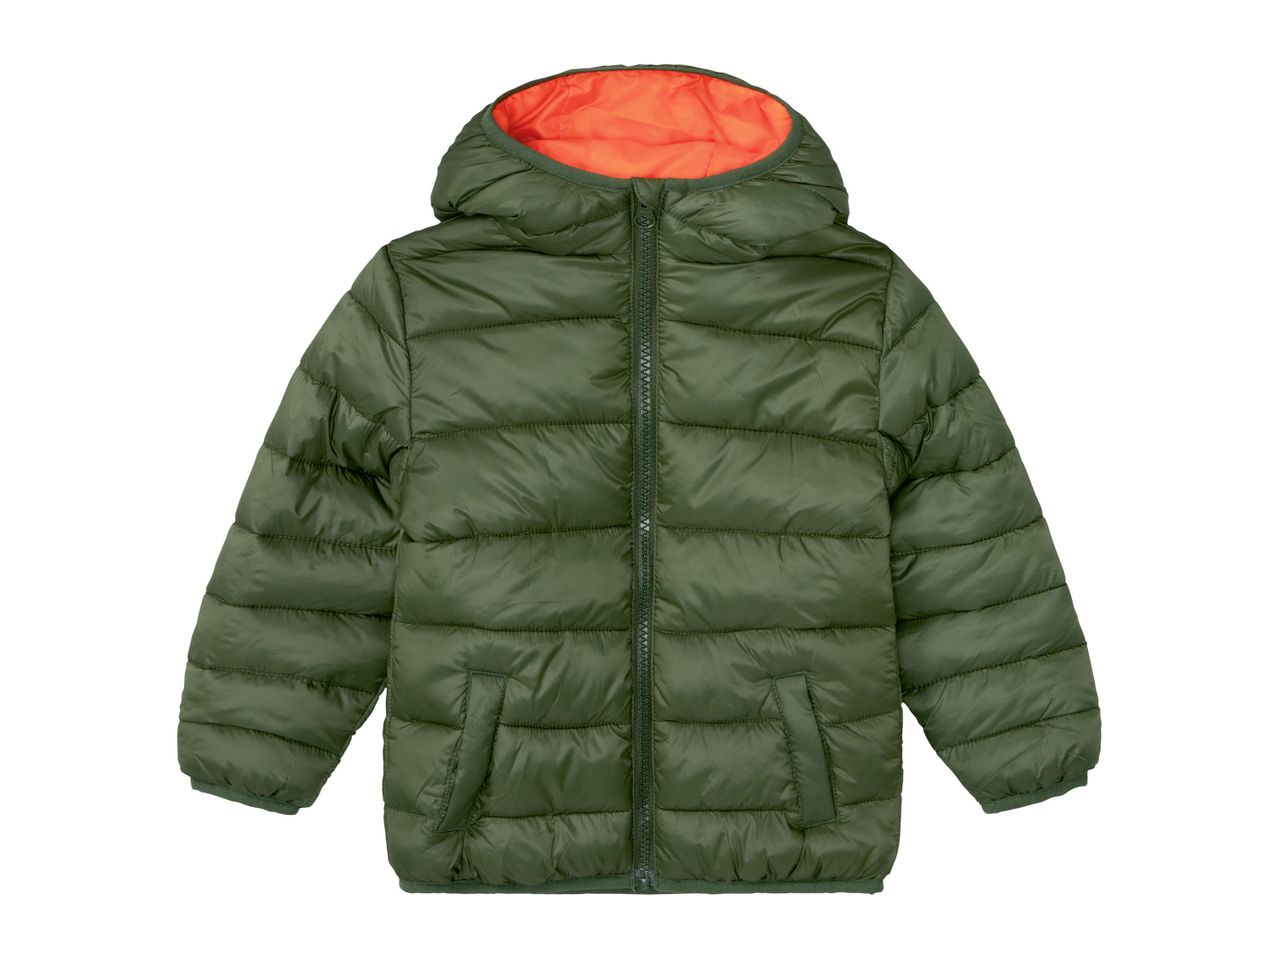 Go to full screen view: Boy’s Lightweight Jacket - Image 2